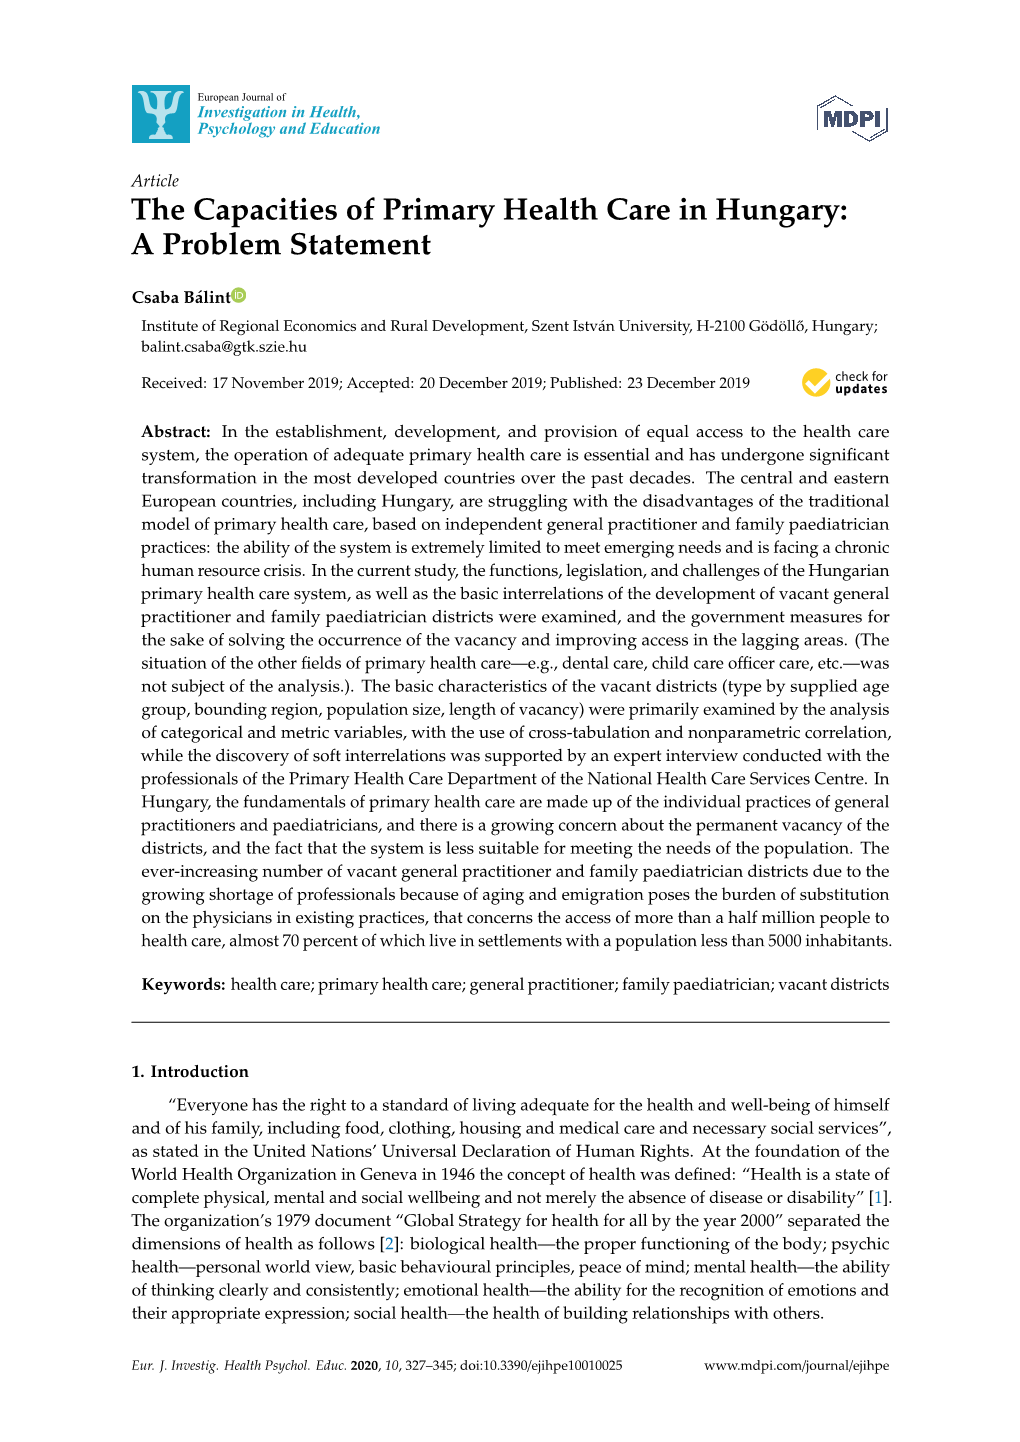 The Capacities of Primary Health Care in Hungary: a Problem Statement